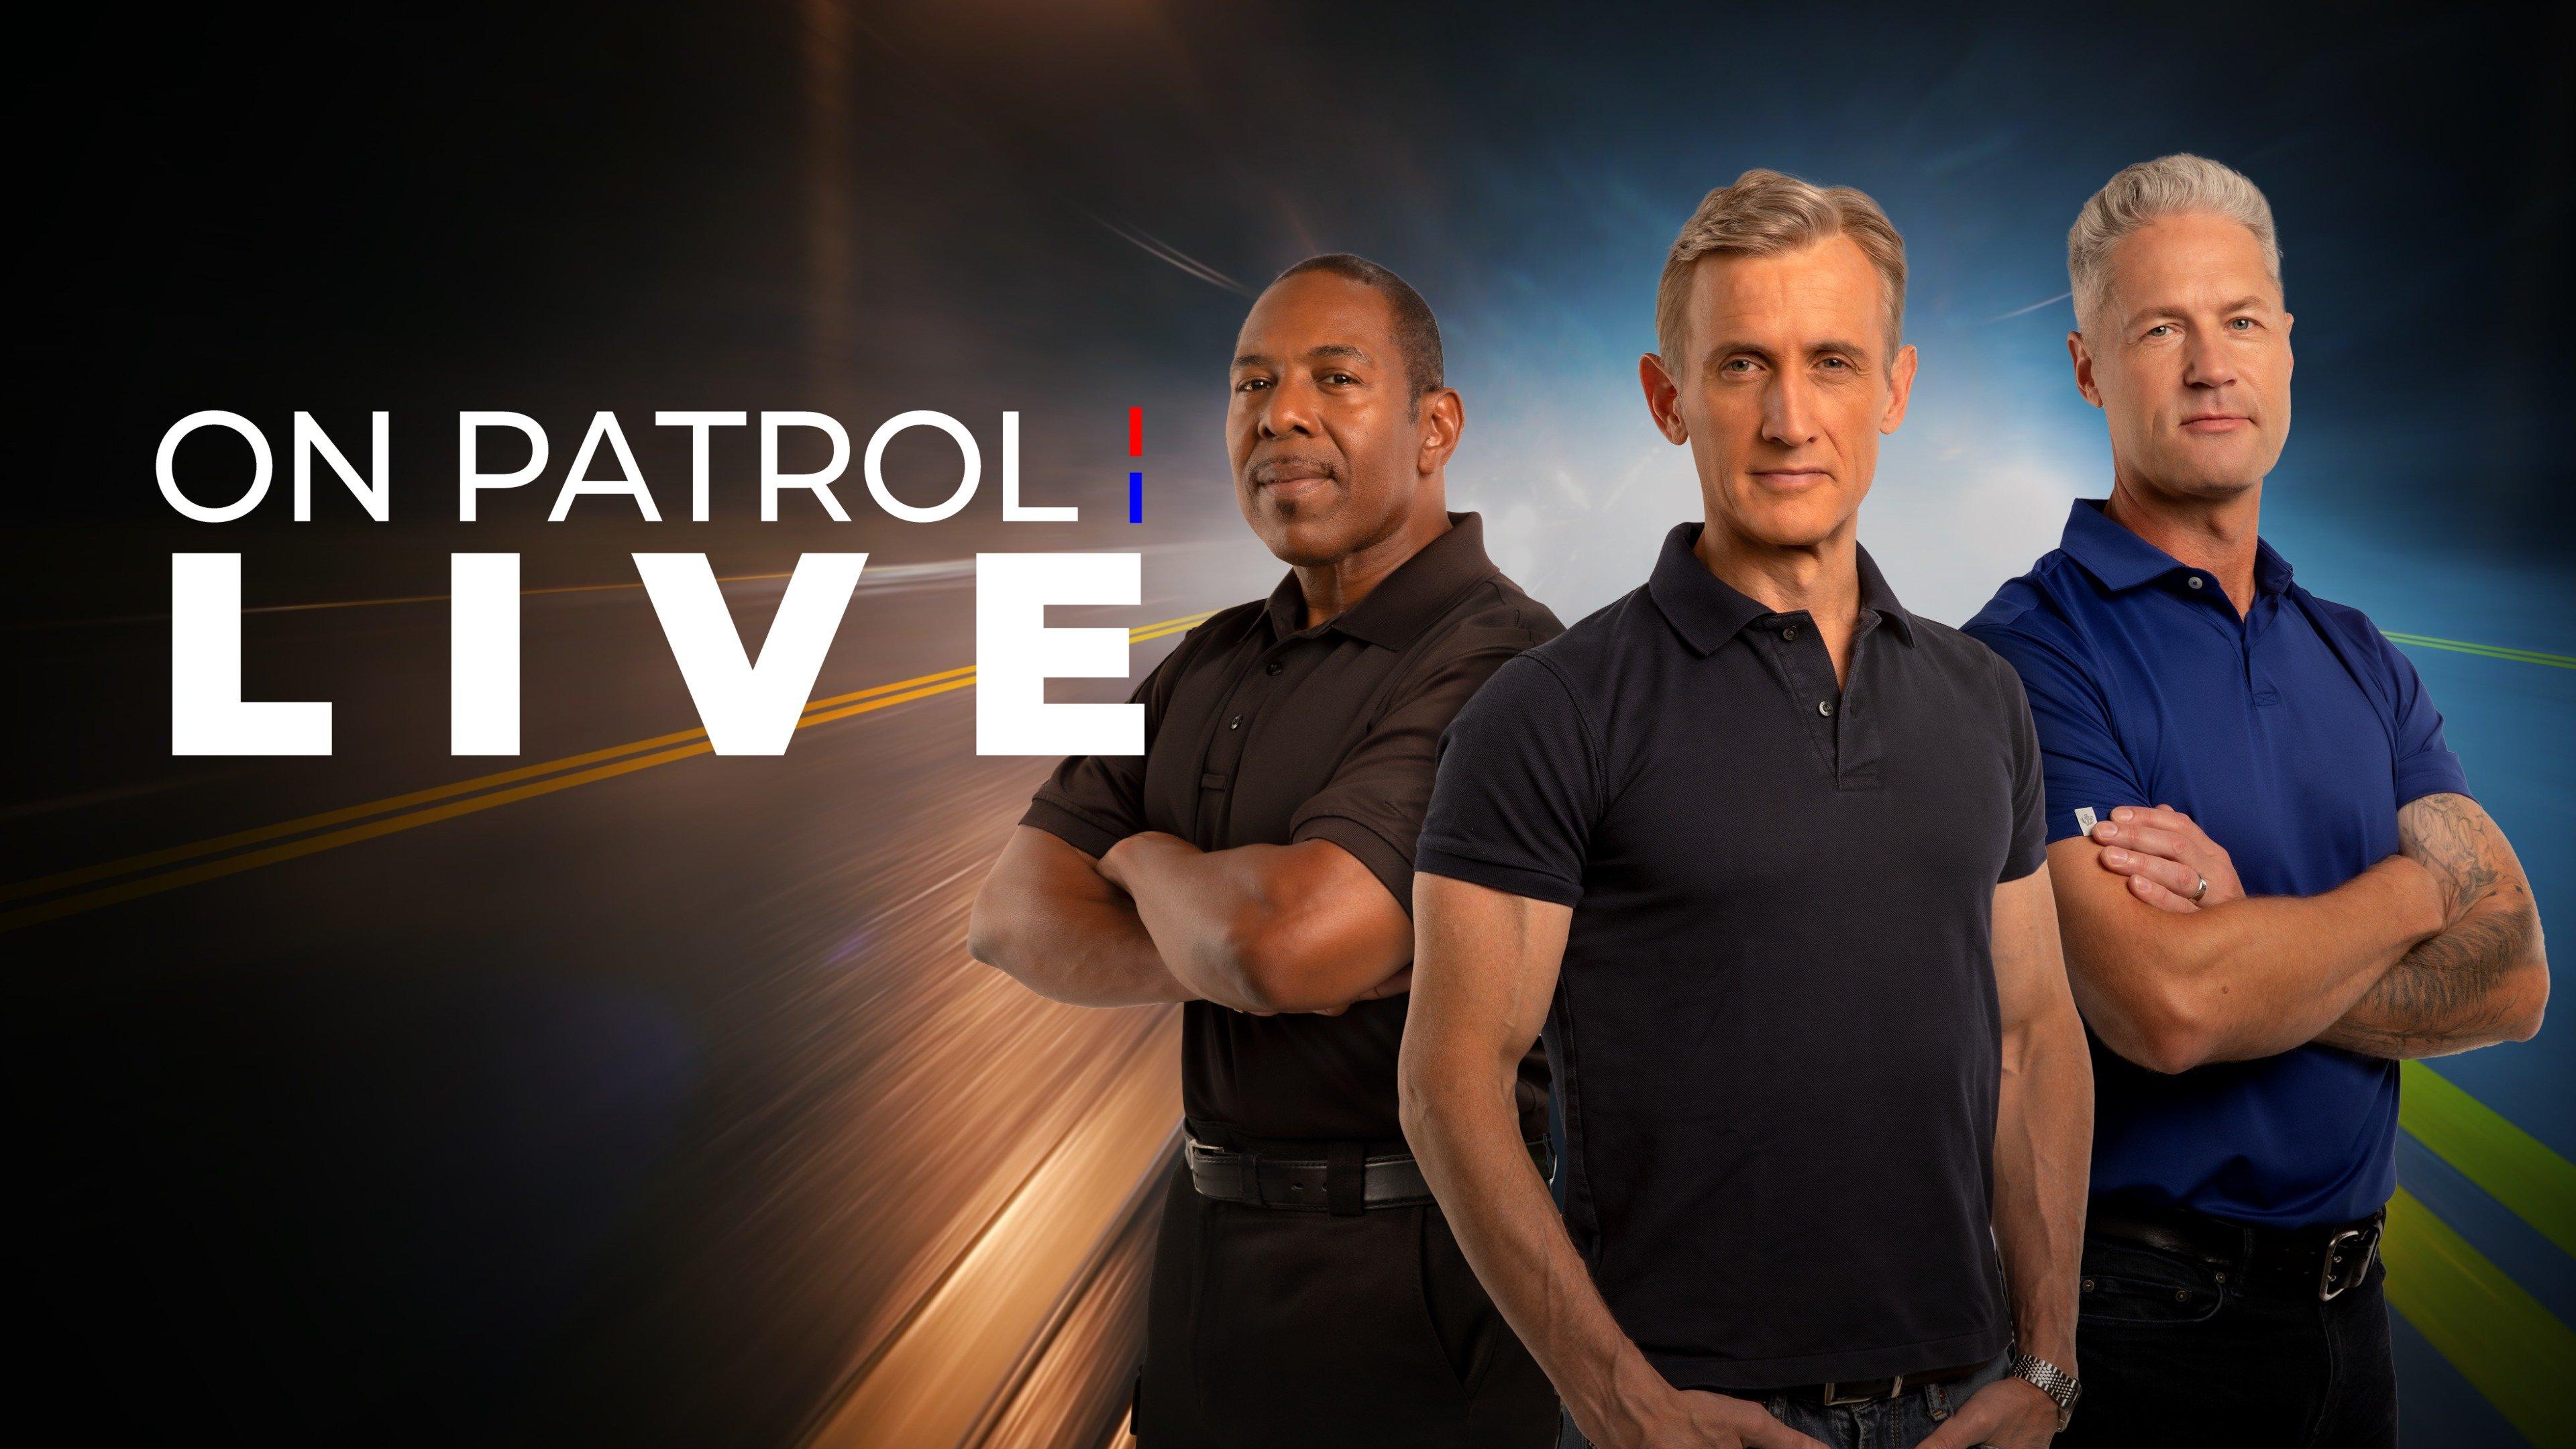 On Patrol Live Watch Streaming Full Episodes on Philo